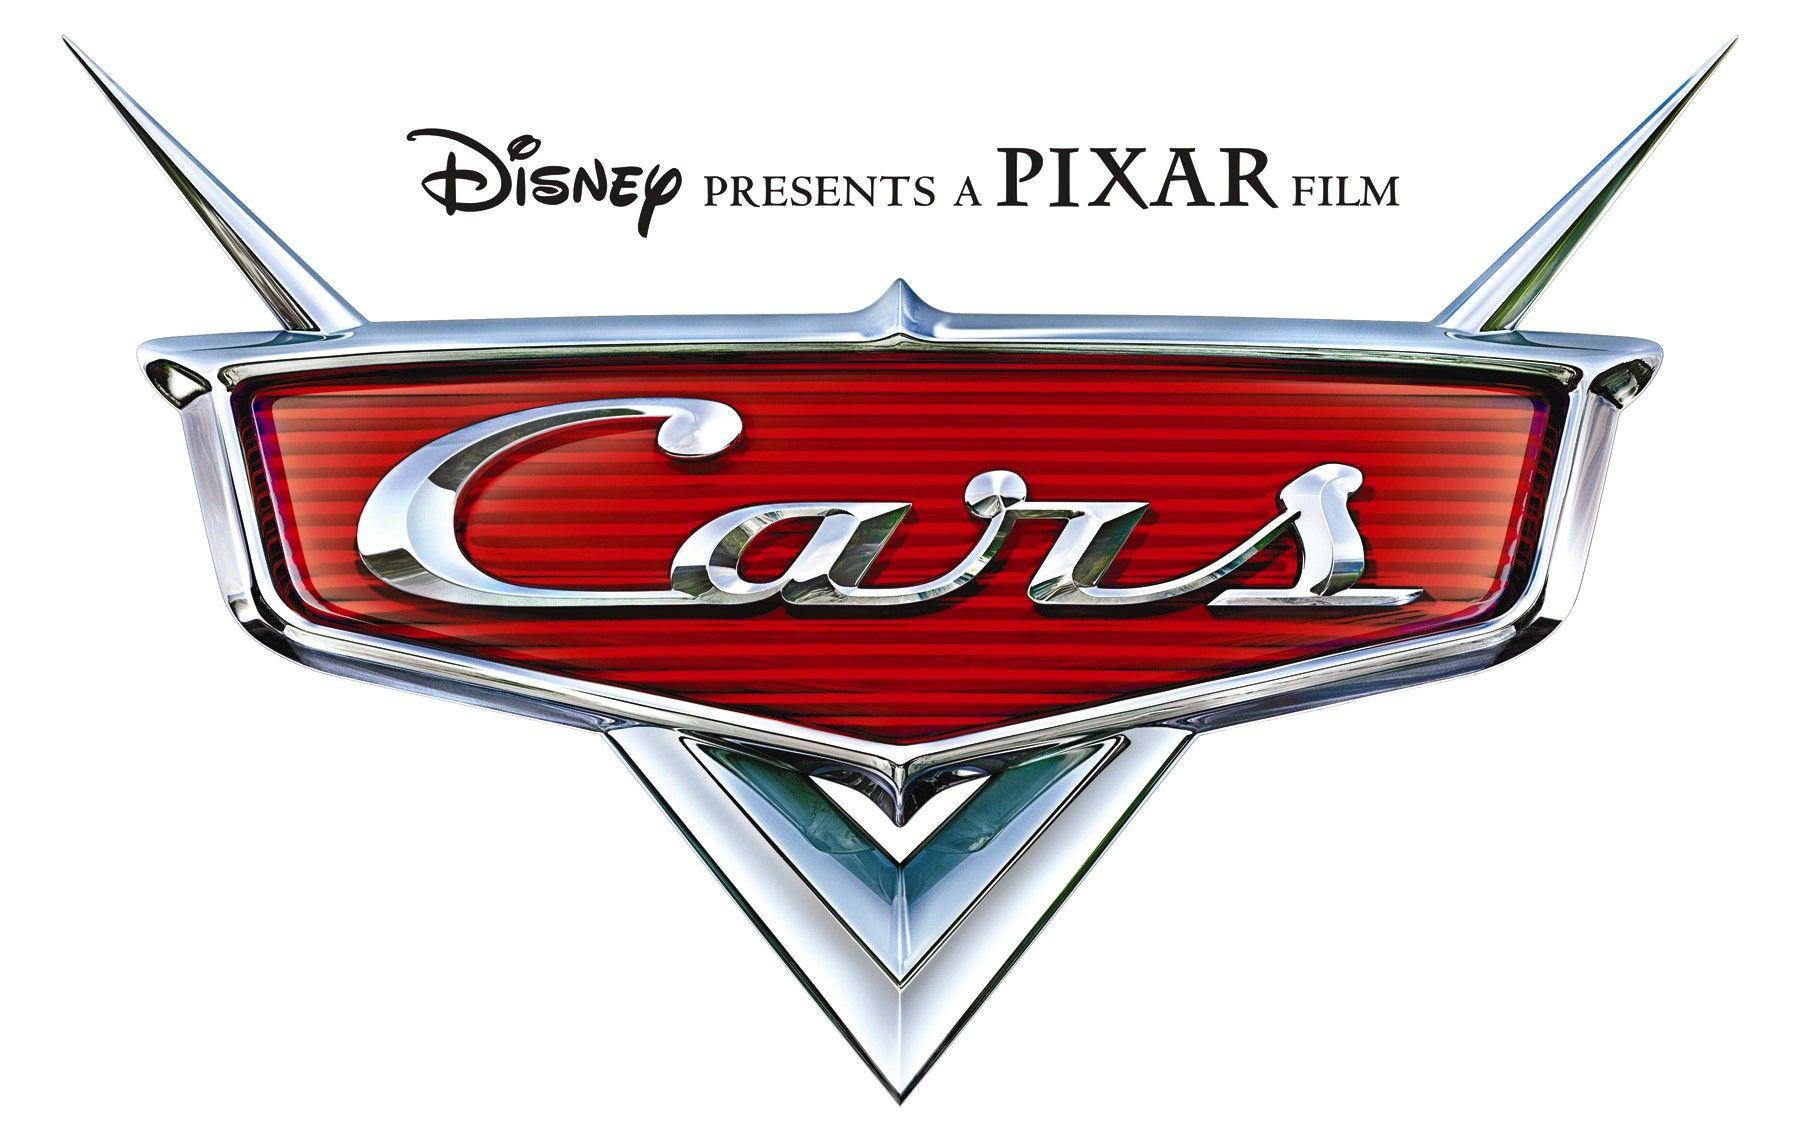 Disney Pixar Cars 2 Logo - Disney Pixar Cars Logo Wallpaper for Phone